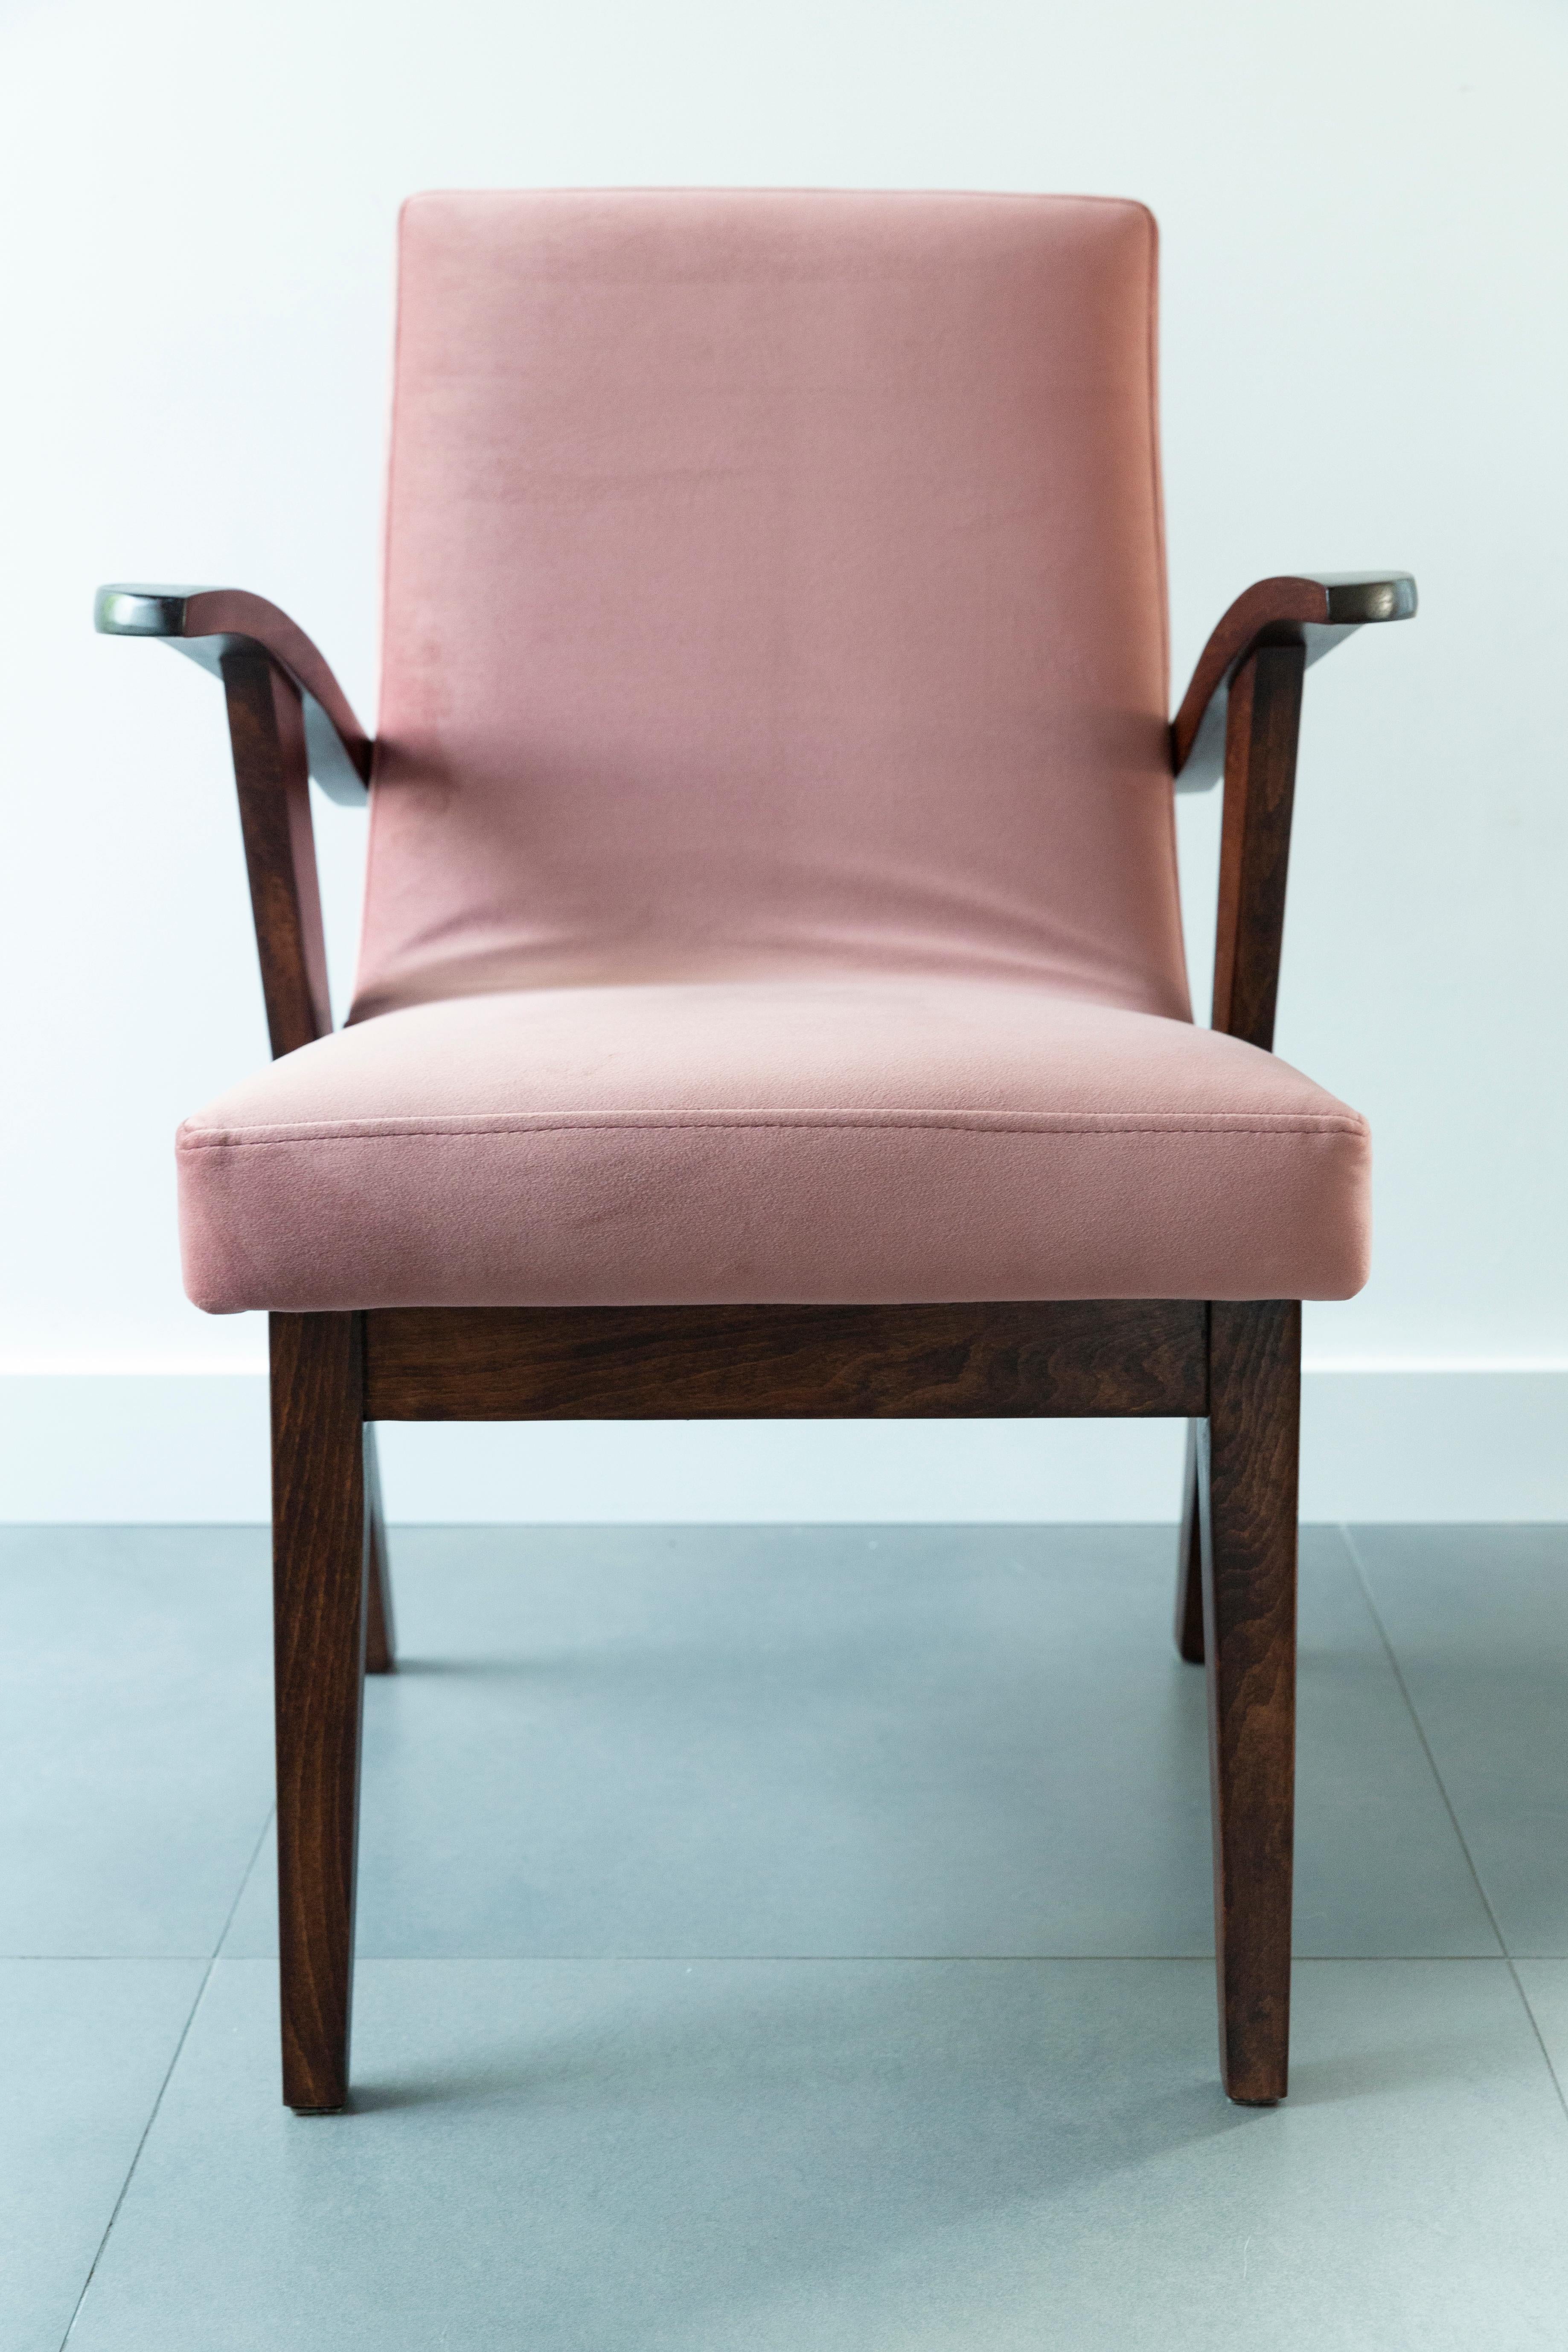 Textile 20th Century Vintage Armchair in Dusty Pink Velvet by Mieczyslaw Puchala, 1960s For Sale